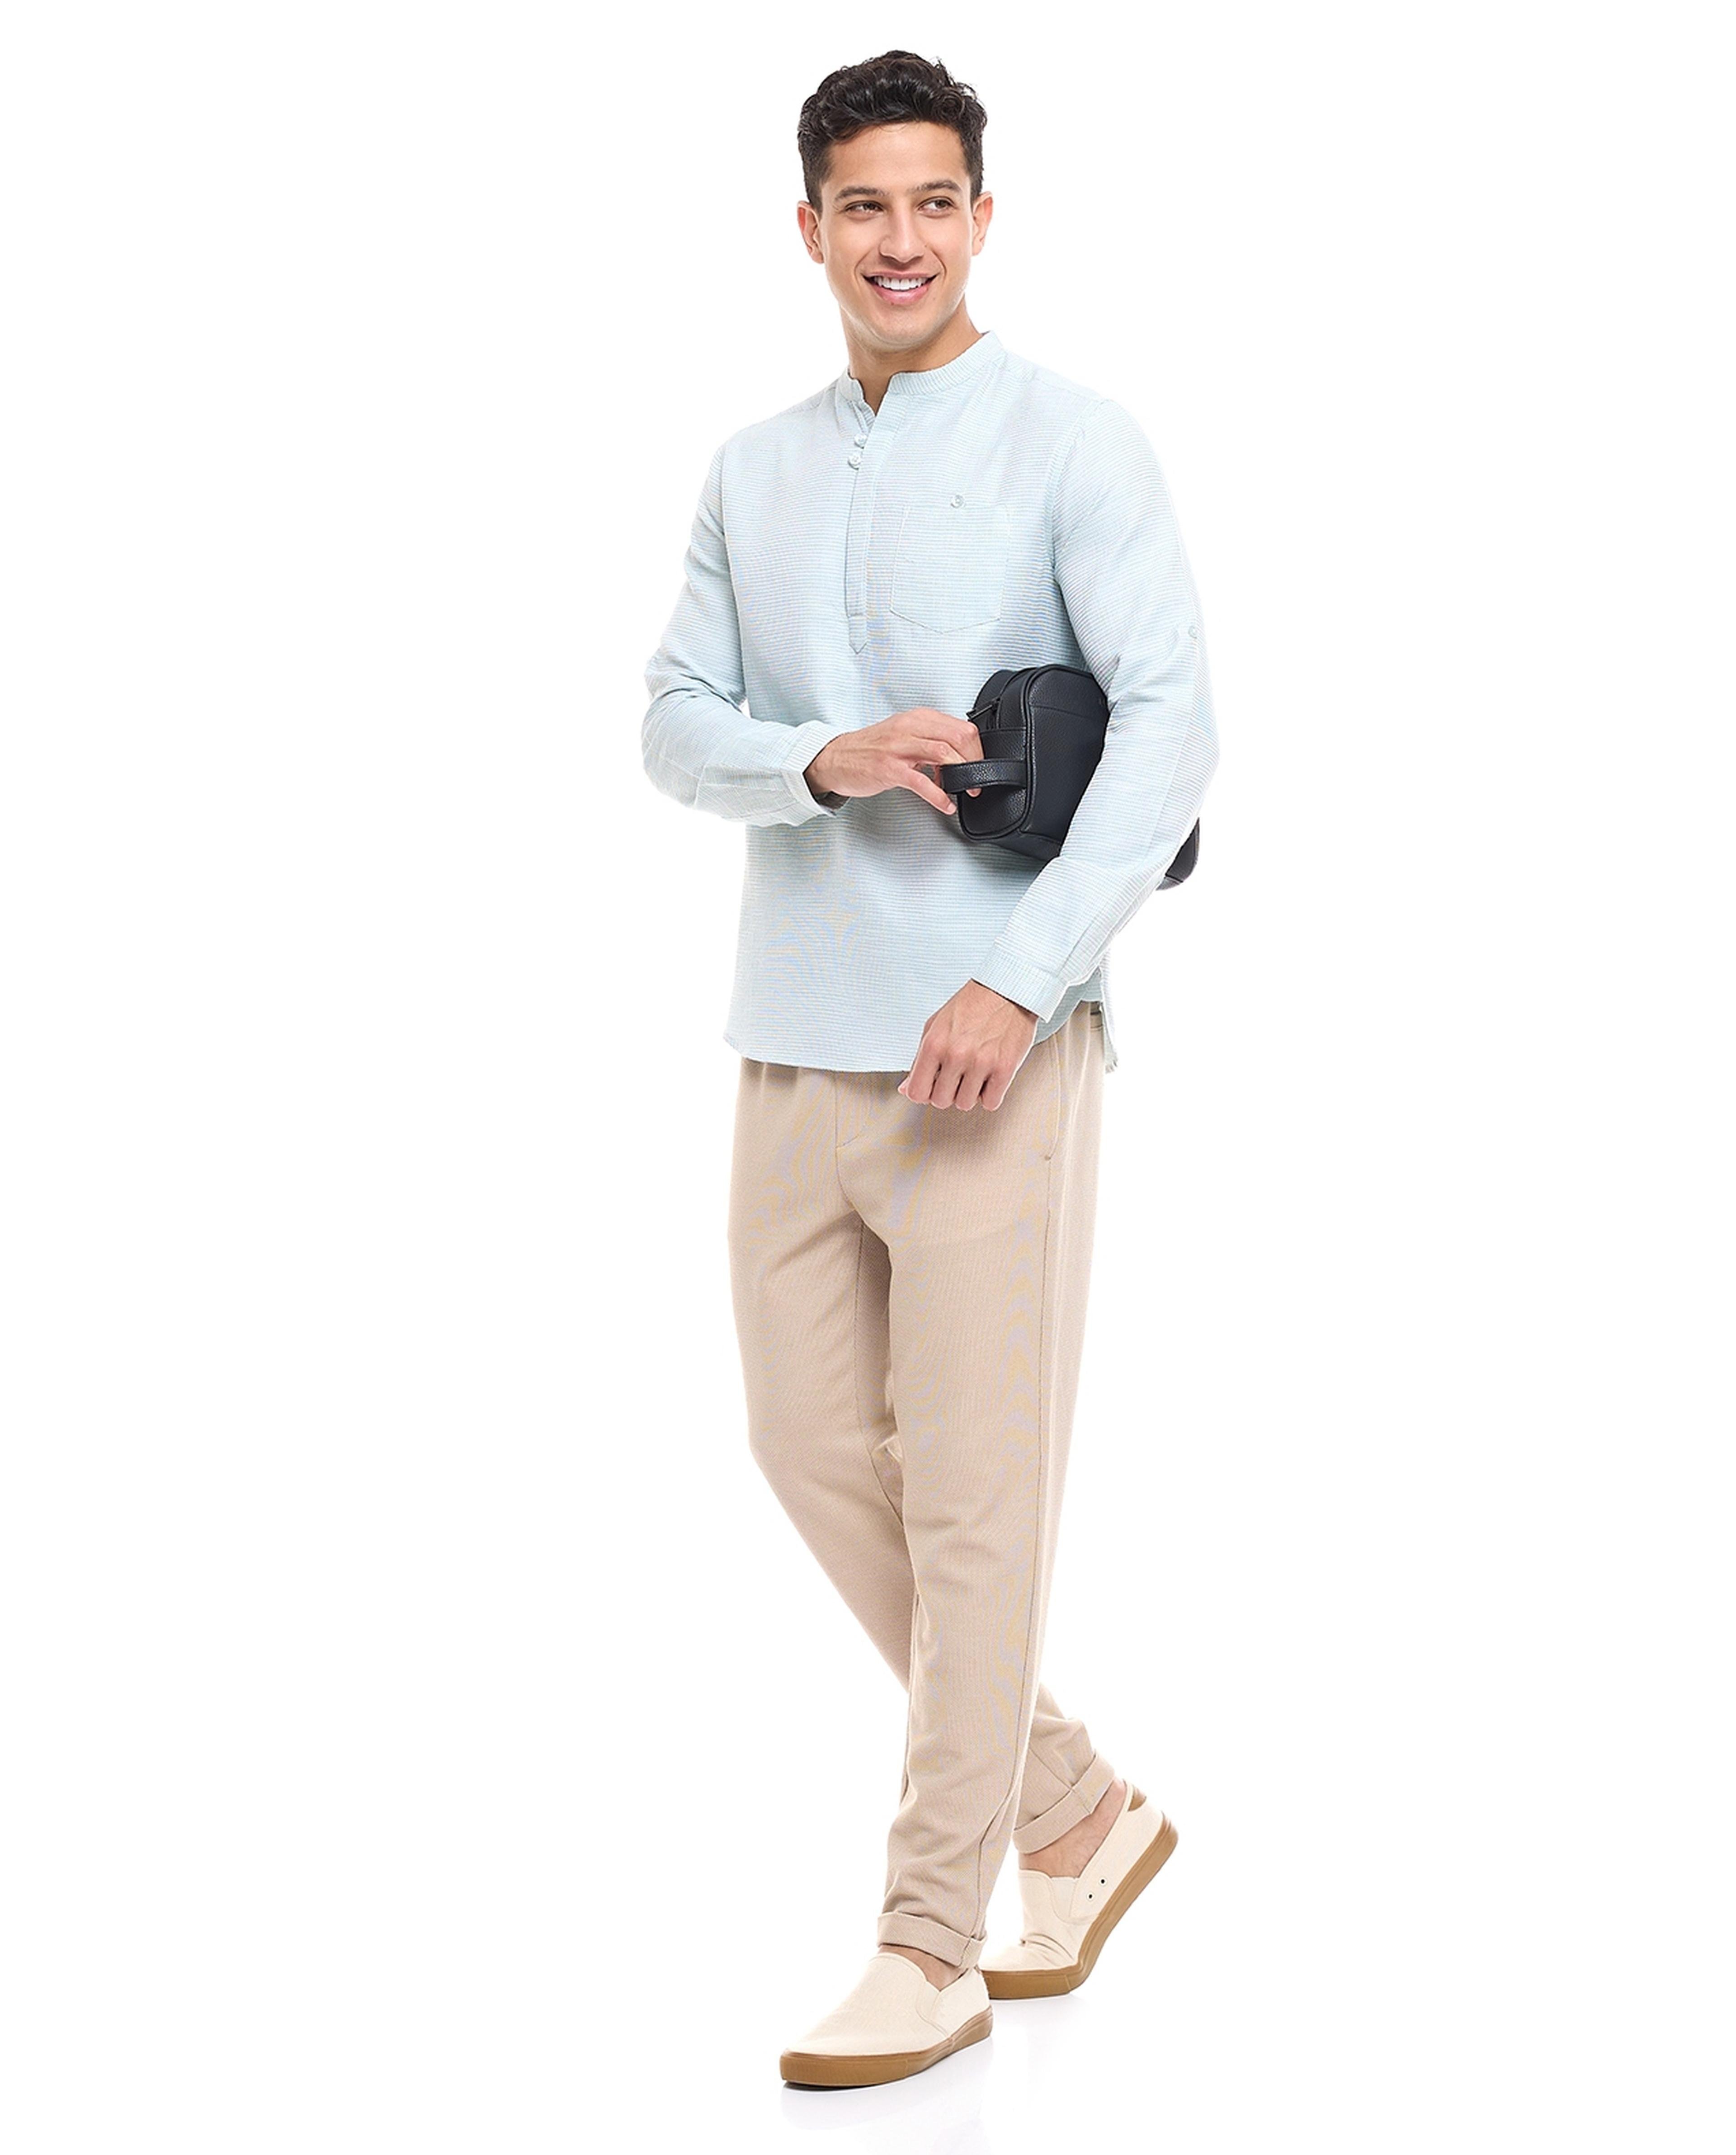 Textured Shirt with Stand Collar and Long Sleeves